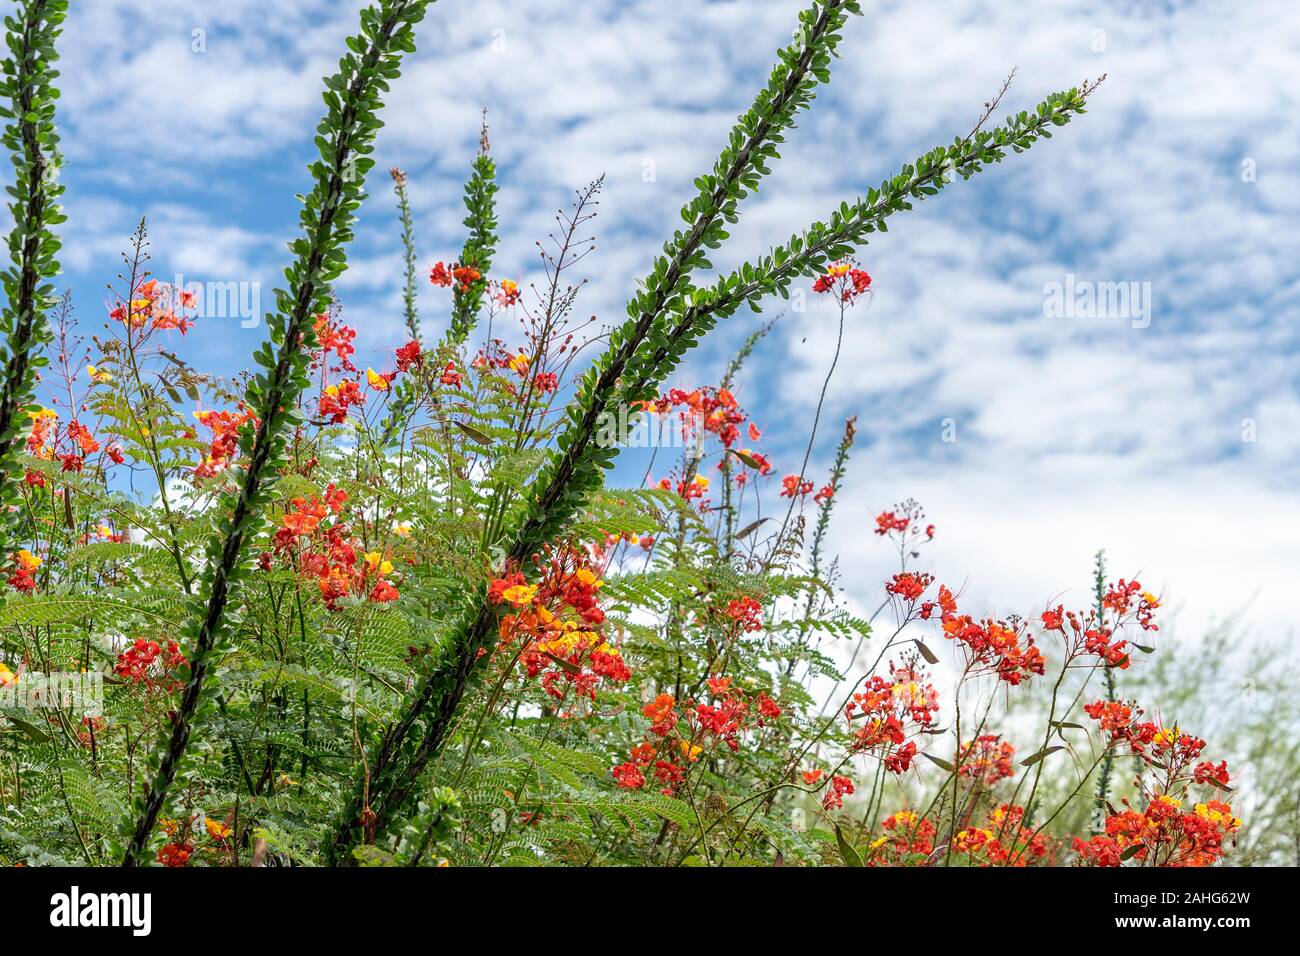 Ocotillos and Mexican Bird of Paradise against a blue sky with clouds Stock Photo